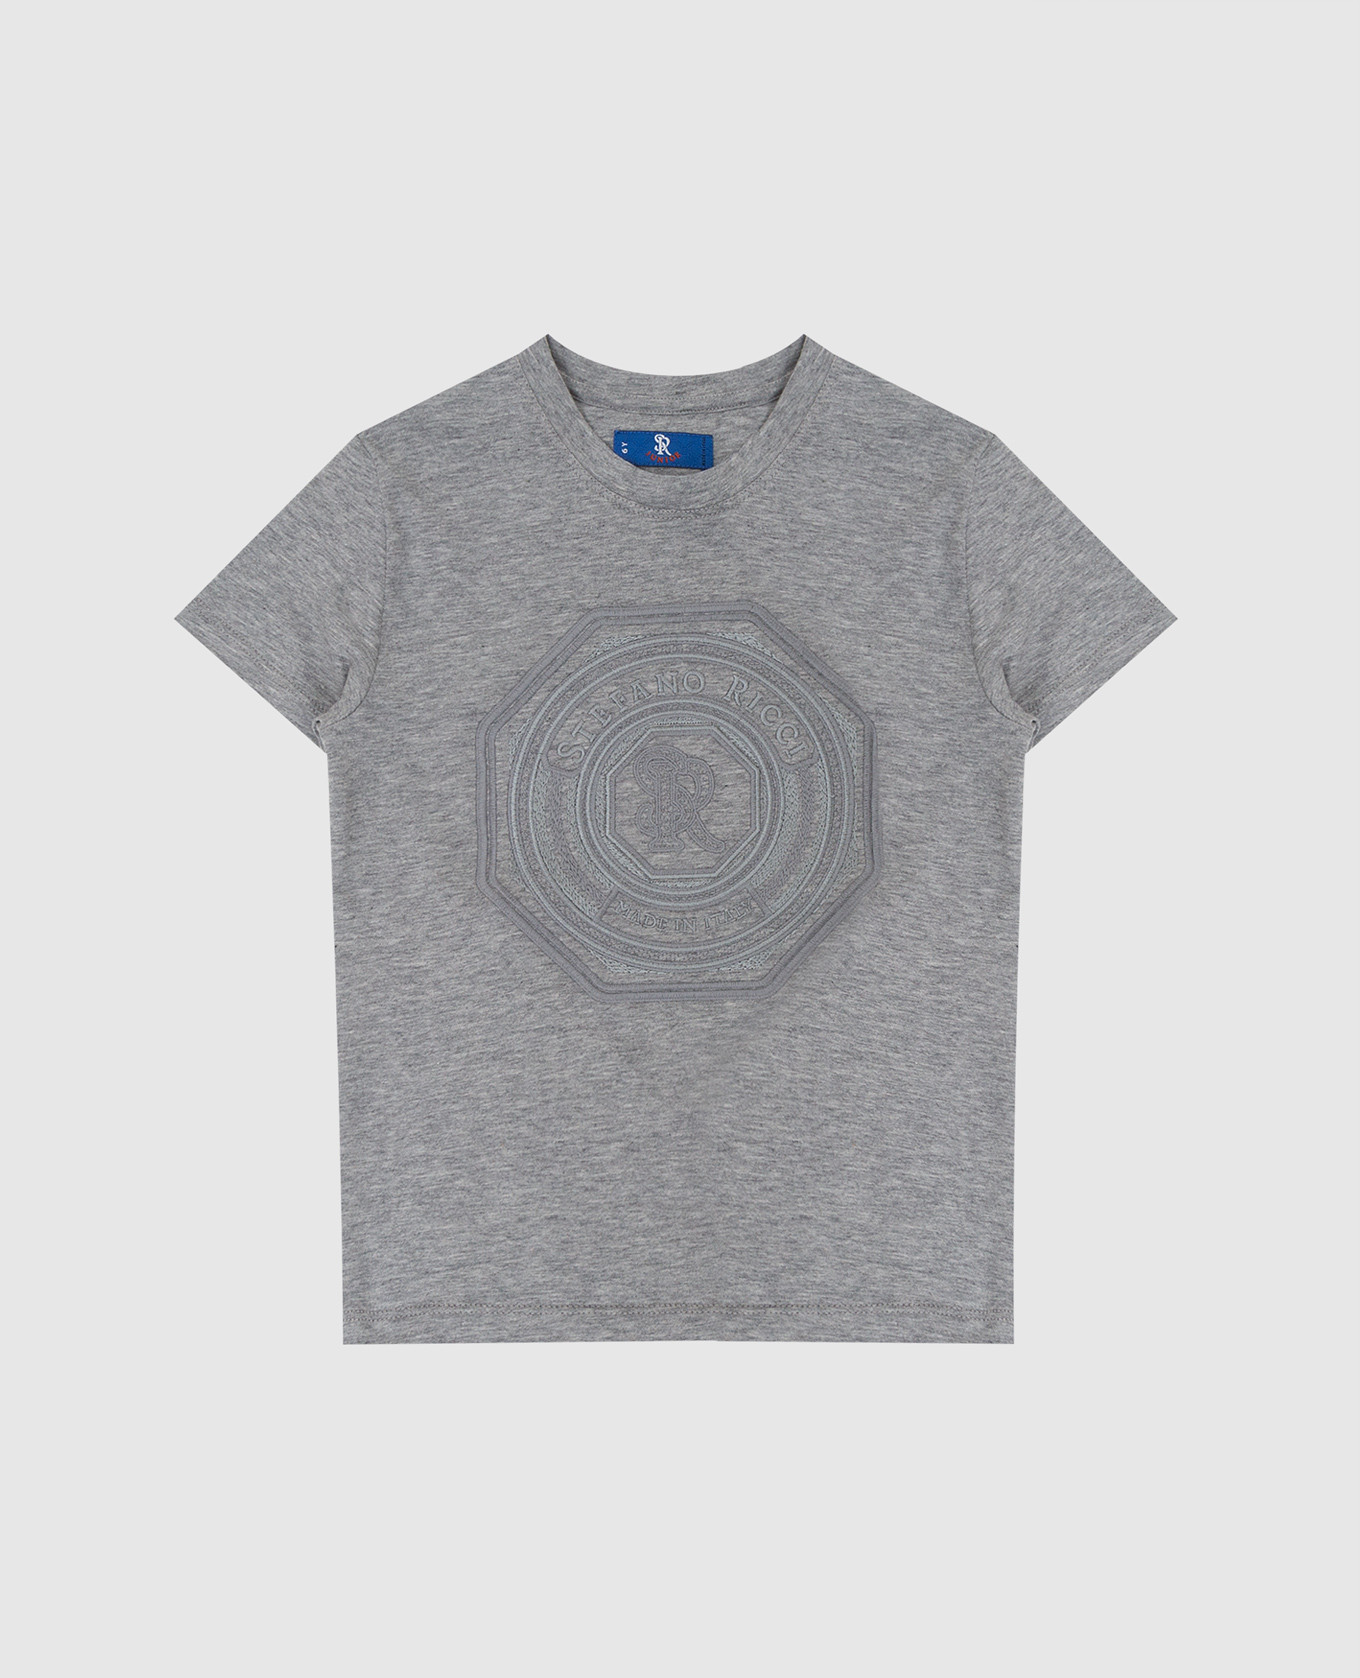 Children's light gray t-shirt with monogram embroidery